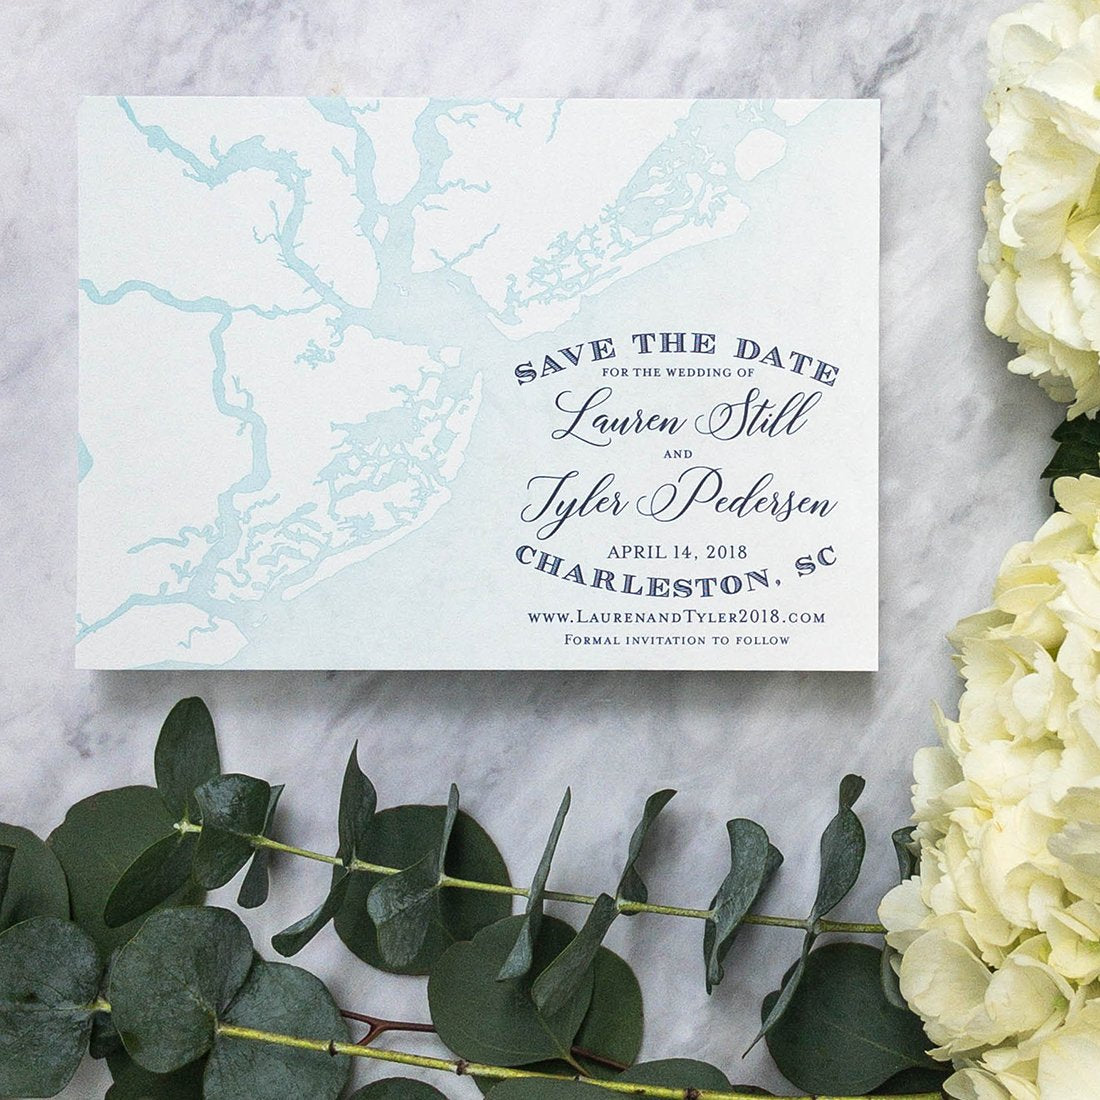 Nautical Charleston Map Save the Date by Scotti Cline Designs